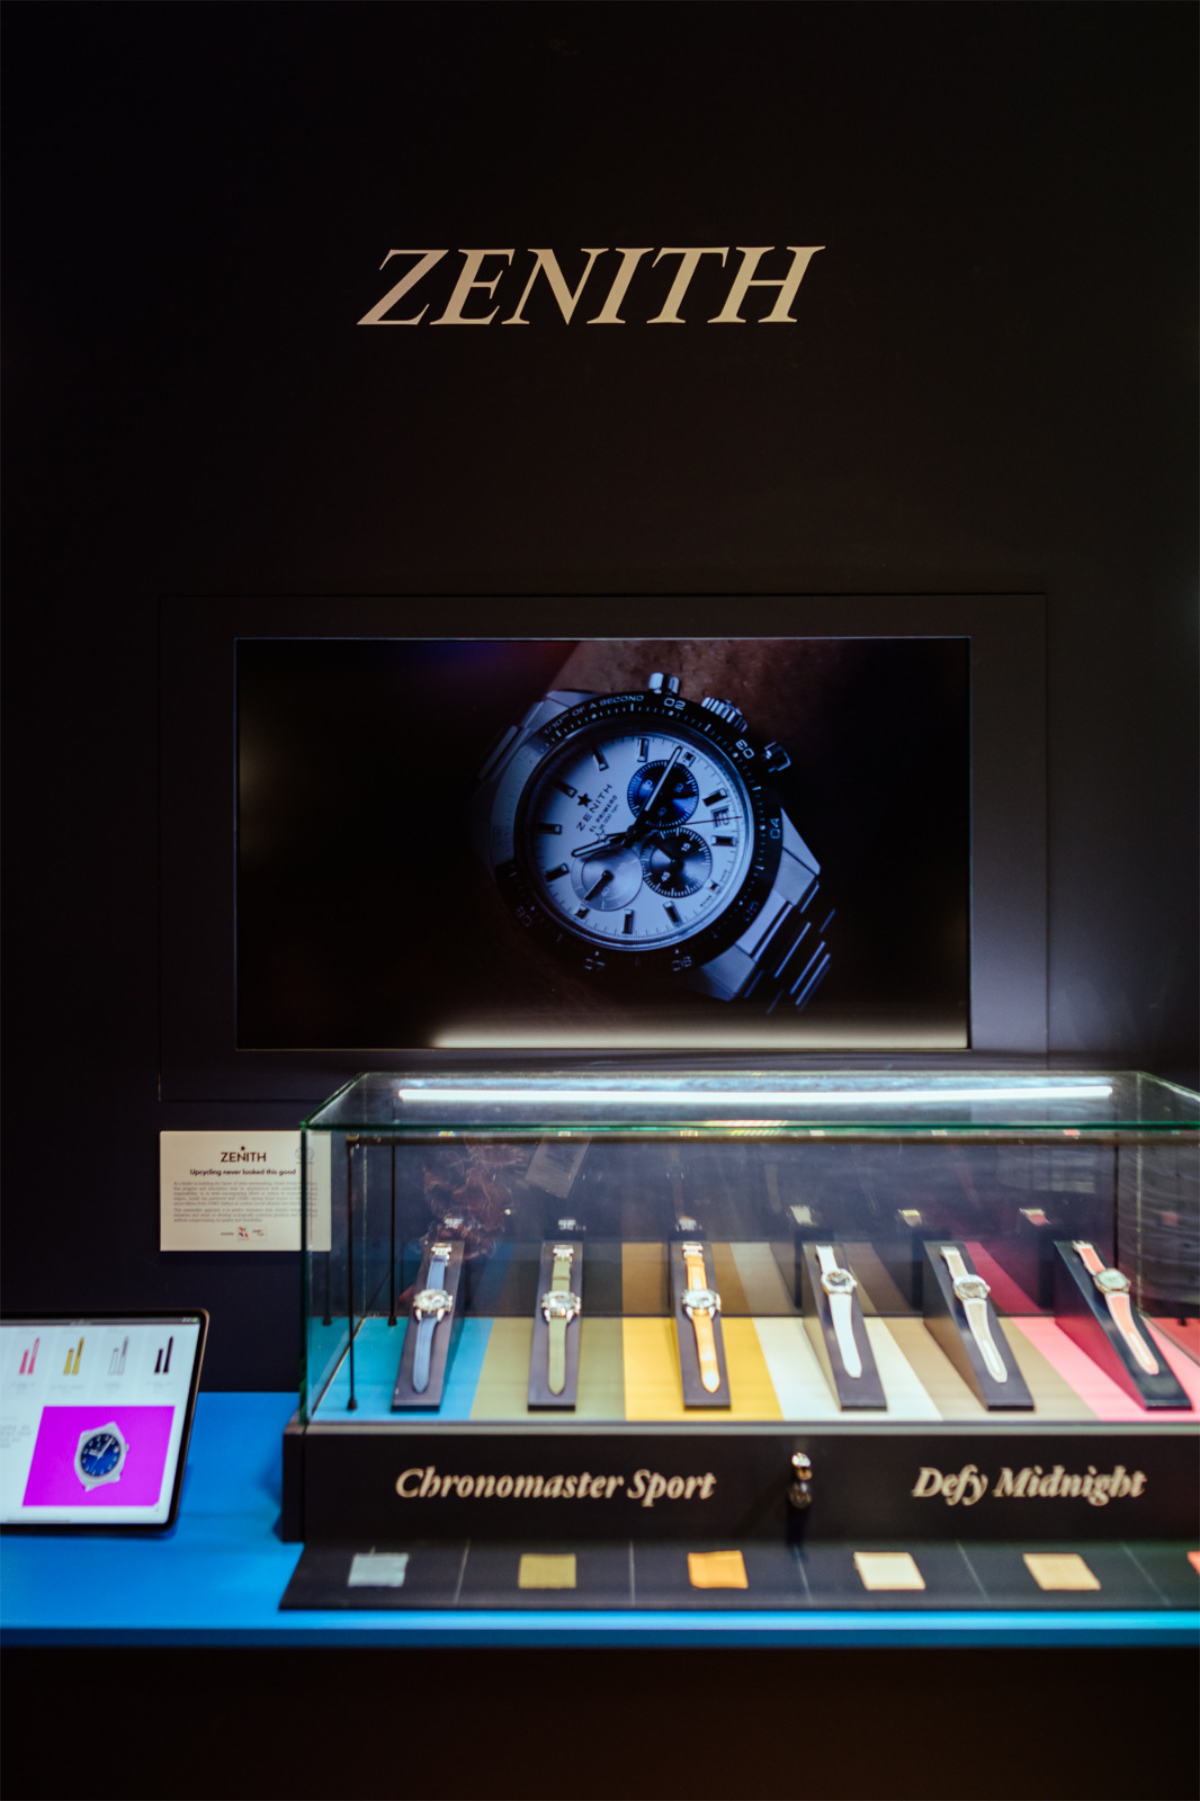 Zenith Unveiled A New Capsule Collection Of Straps Made Of Excess High-Fashion Textiles